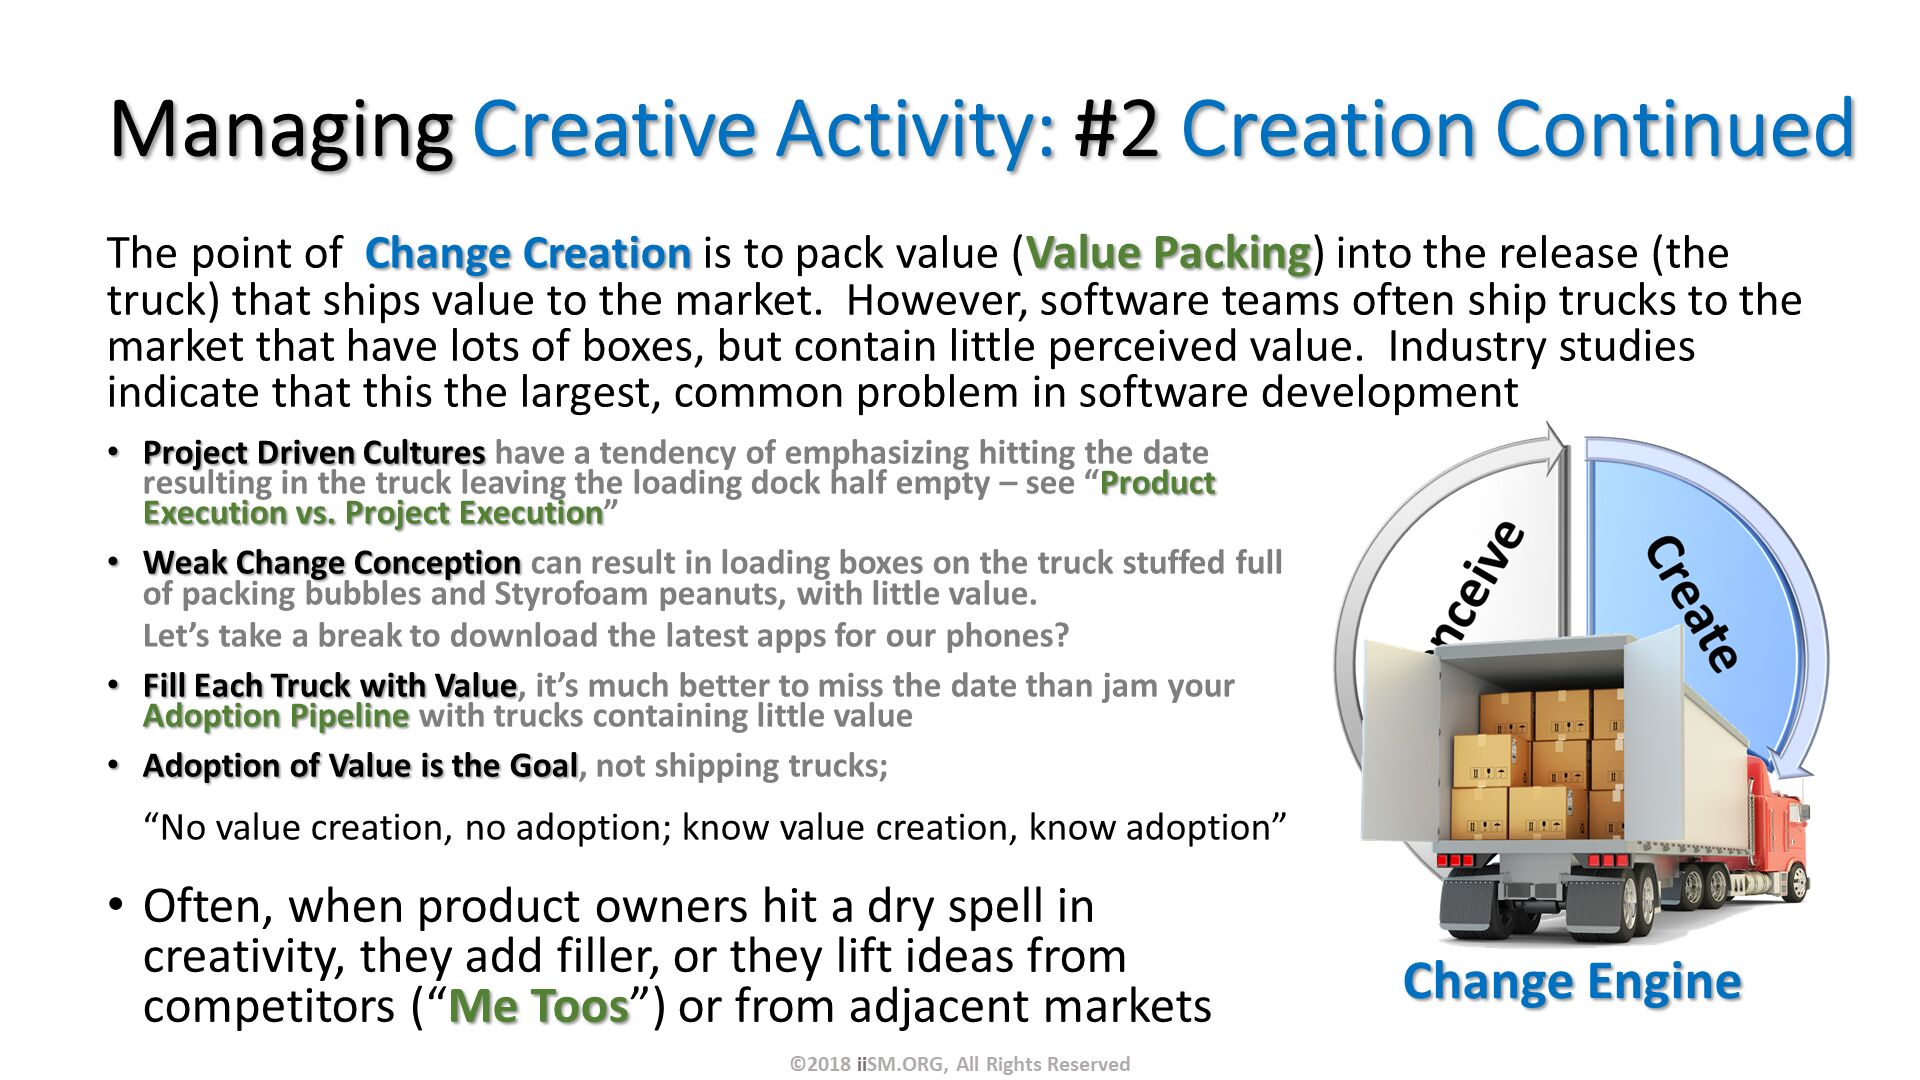 Managing Creative Activity: #2 Creation Continued. The point of  Change Creation is to pack value (Value Packing) into the release (the truck) that ships value to the market.  However, software teams often ship trucks to the market that have lots of boxes, but contain little perceived value.  Industry studies indicate that this the largest, common problem in software development. Often, when product owners hit a dry spell in creativity, they add filler, or they lift ideas from competitors (“Me Toos”) or from adjacent markets
. Change Engine . Project Driven Cultures have a tendency of emphasizing hitting the date resulting in the truck leaving the loading dock half empty – see “Product Execution vs. Project Execution”
Weak Change Conception can result in loading boxes on the truck stuffed full of packing bubbles and Styrofoam peanuts, with little value.  Let’s take a break to download the latest apps for our phones?
Fill Each Truck with Value, it’s much better to miss the date than jam your Adoption Pipeline with trucks containing little value
Adoption of Value is the Goal, not shipping trucks; “No value creation, no adoption; know value creation, know adoption”. ©2018 iiSM.ORG, All Rights Reserved. 